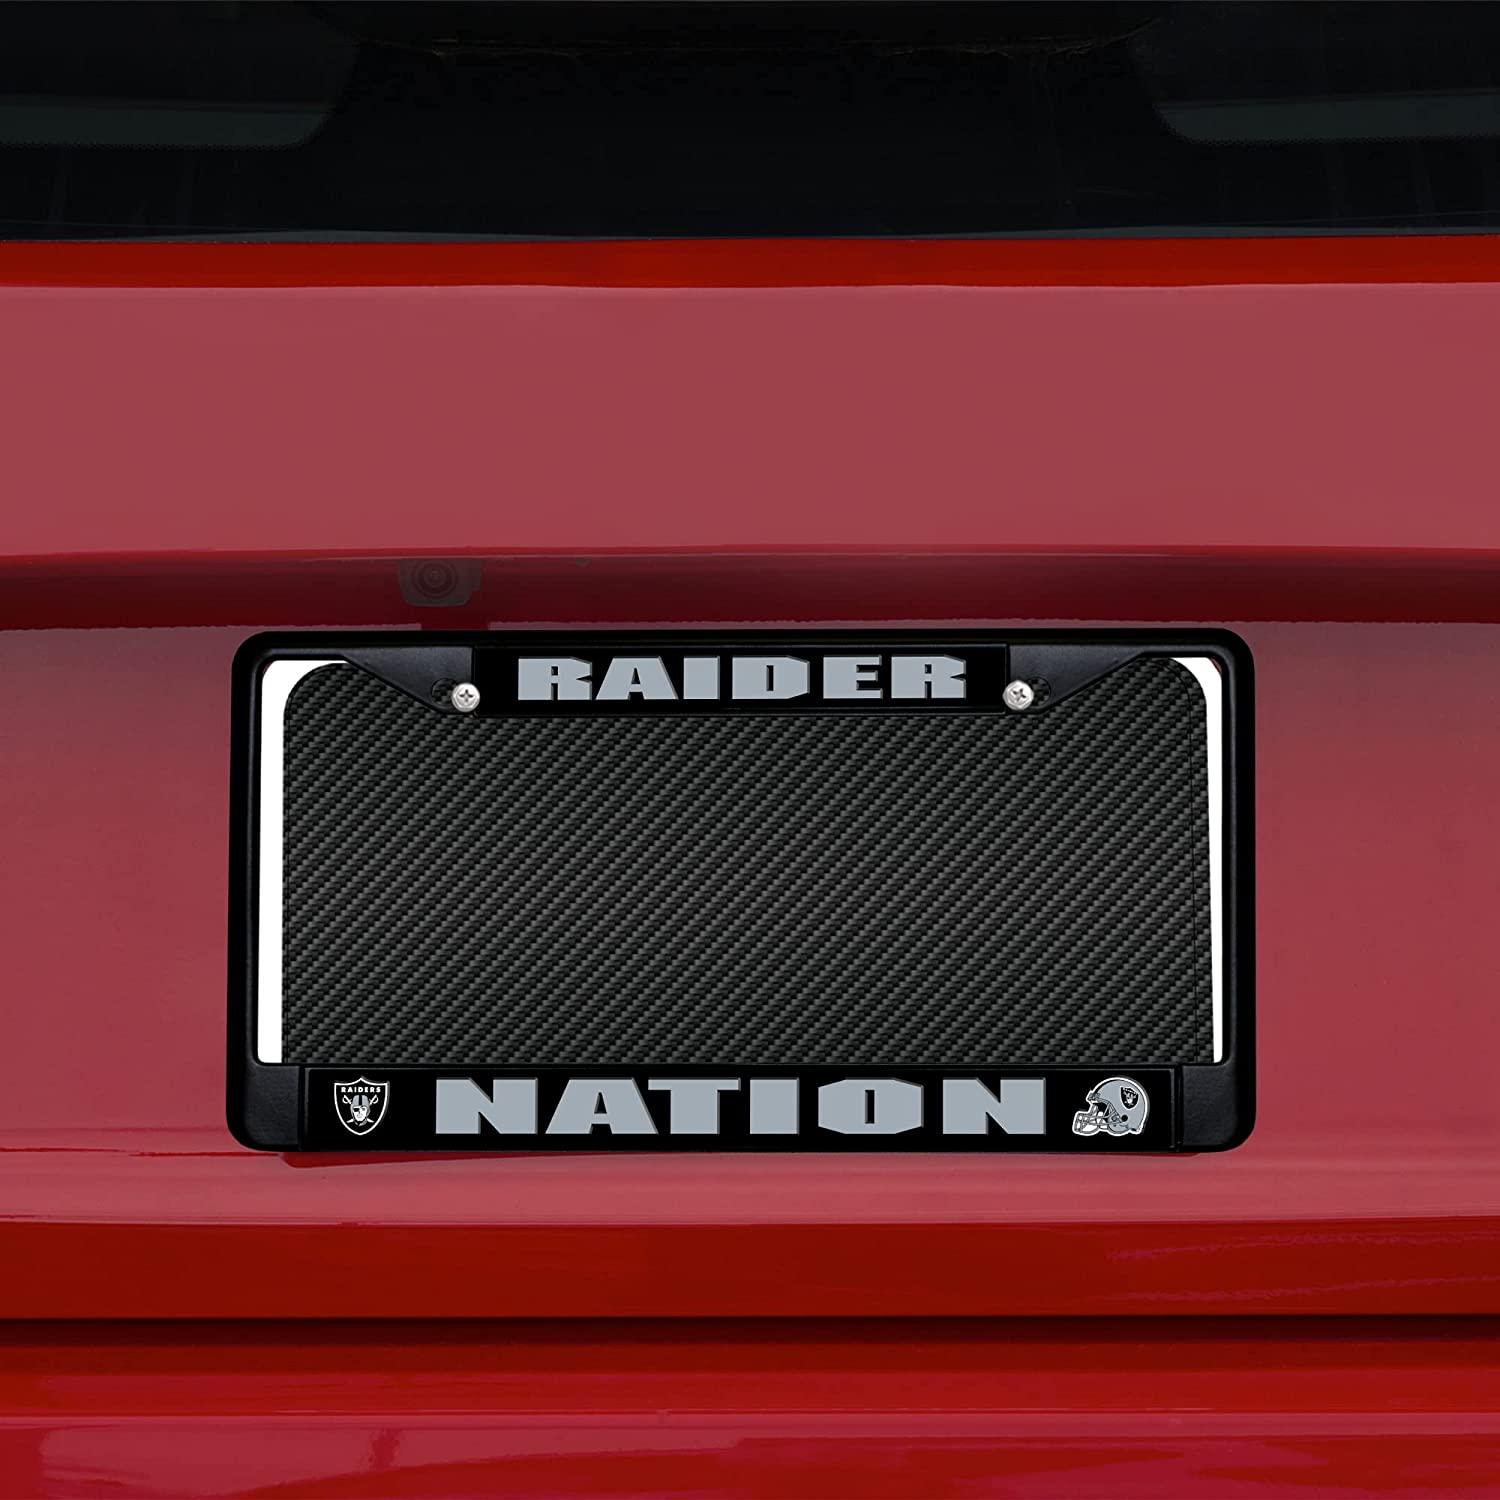 Las Vegas raiders license plate frame laser cut officially licensed